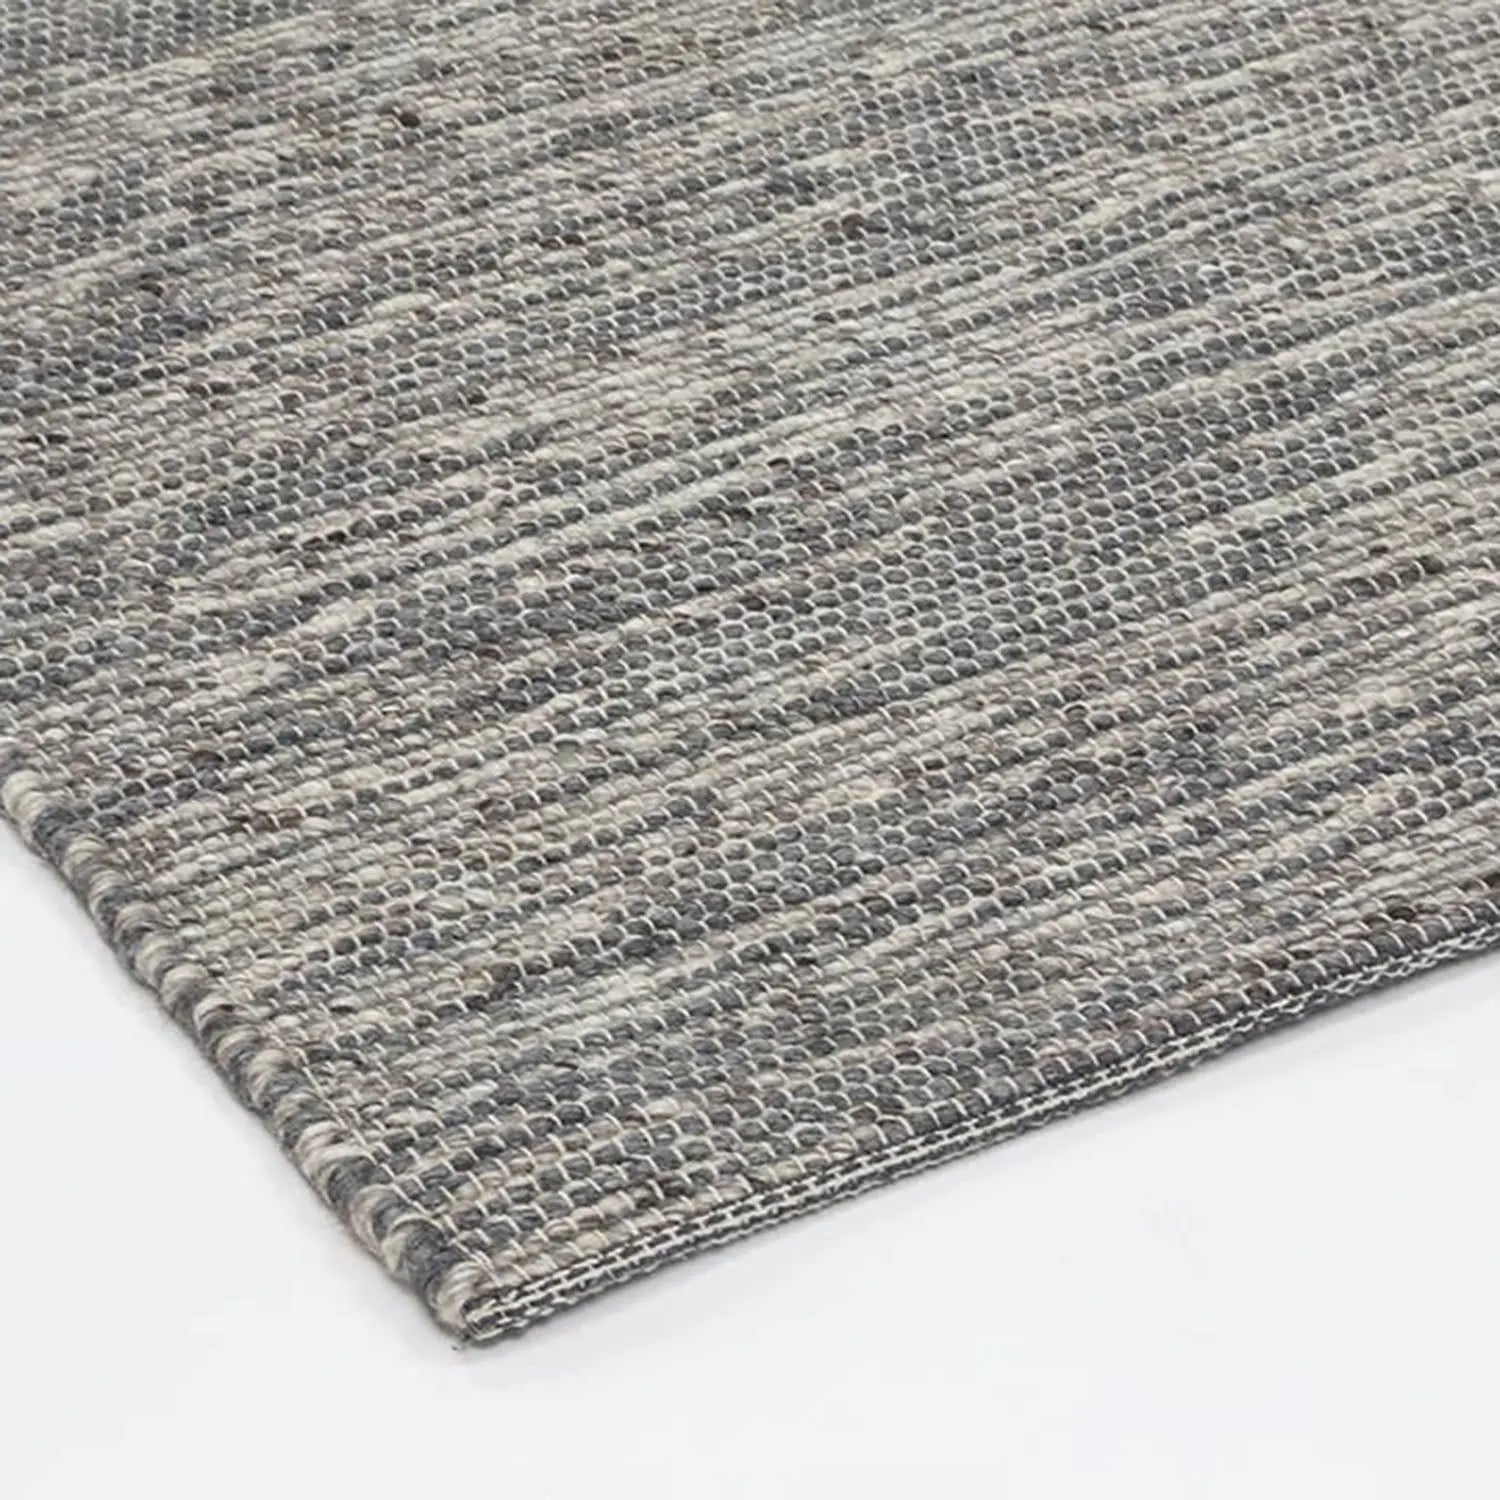 Twill Anthracite Woven Rug - Area Rug - Rugs a Million